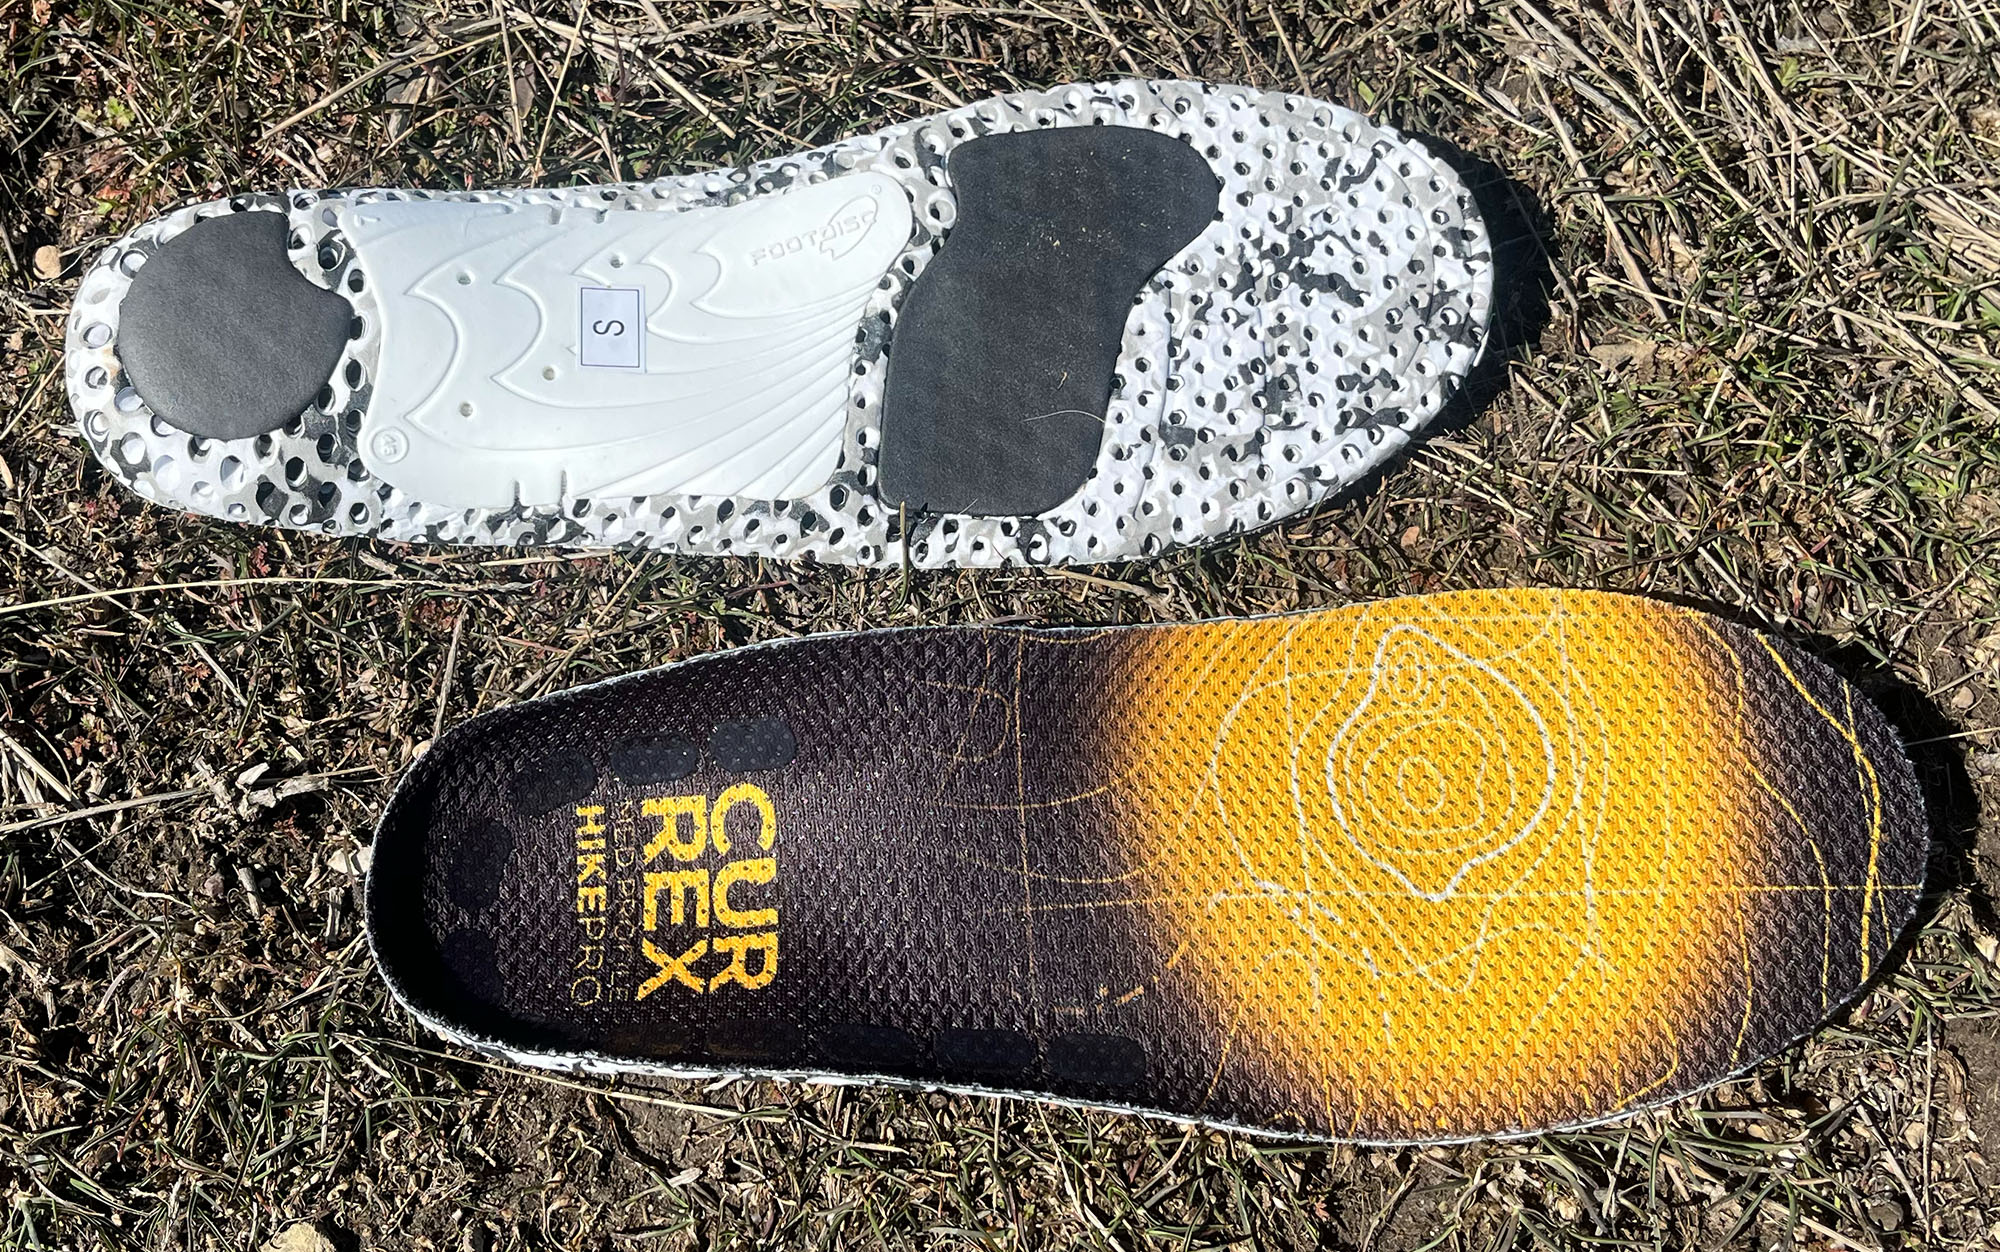 The Currex HikePro is one of the best insoles for hiking.